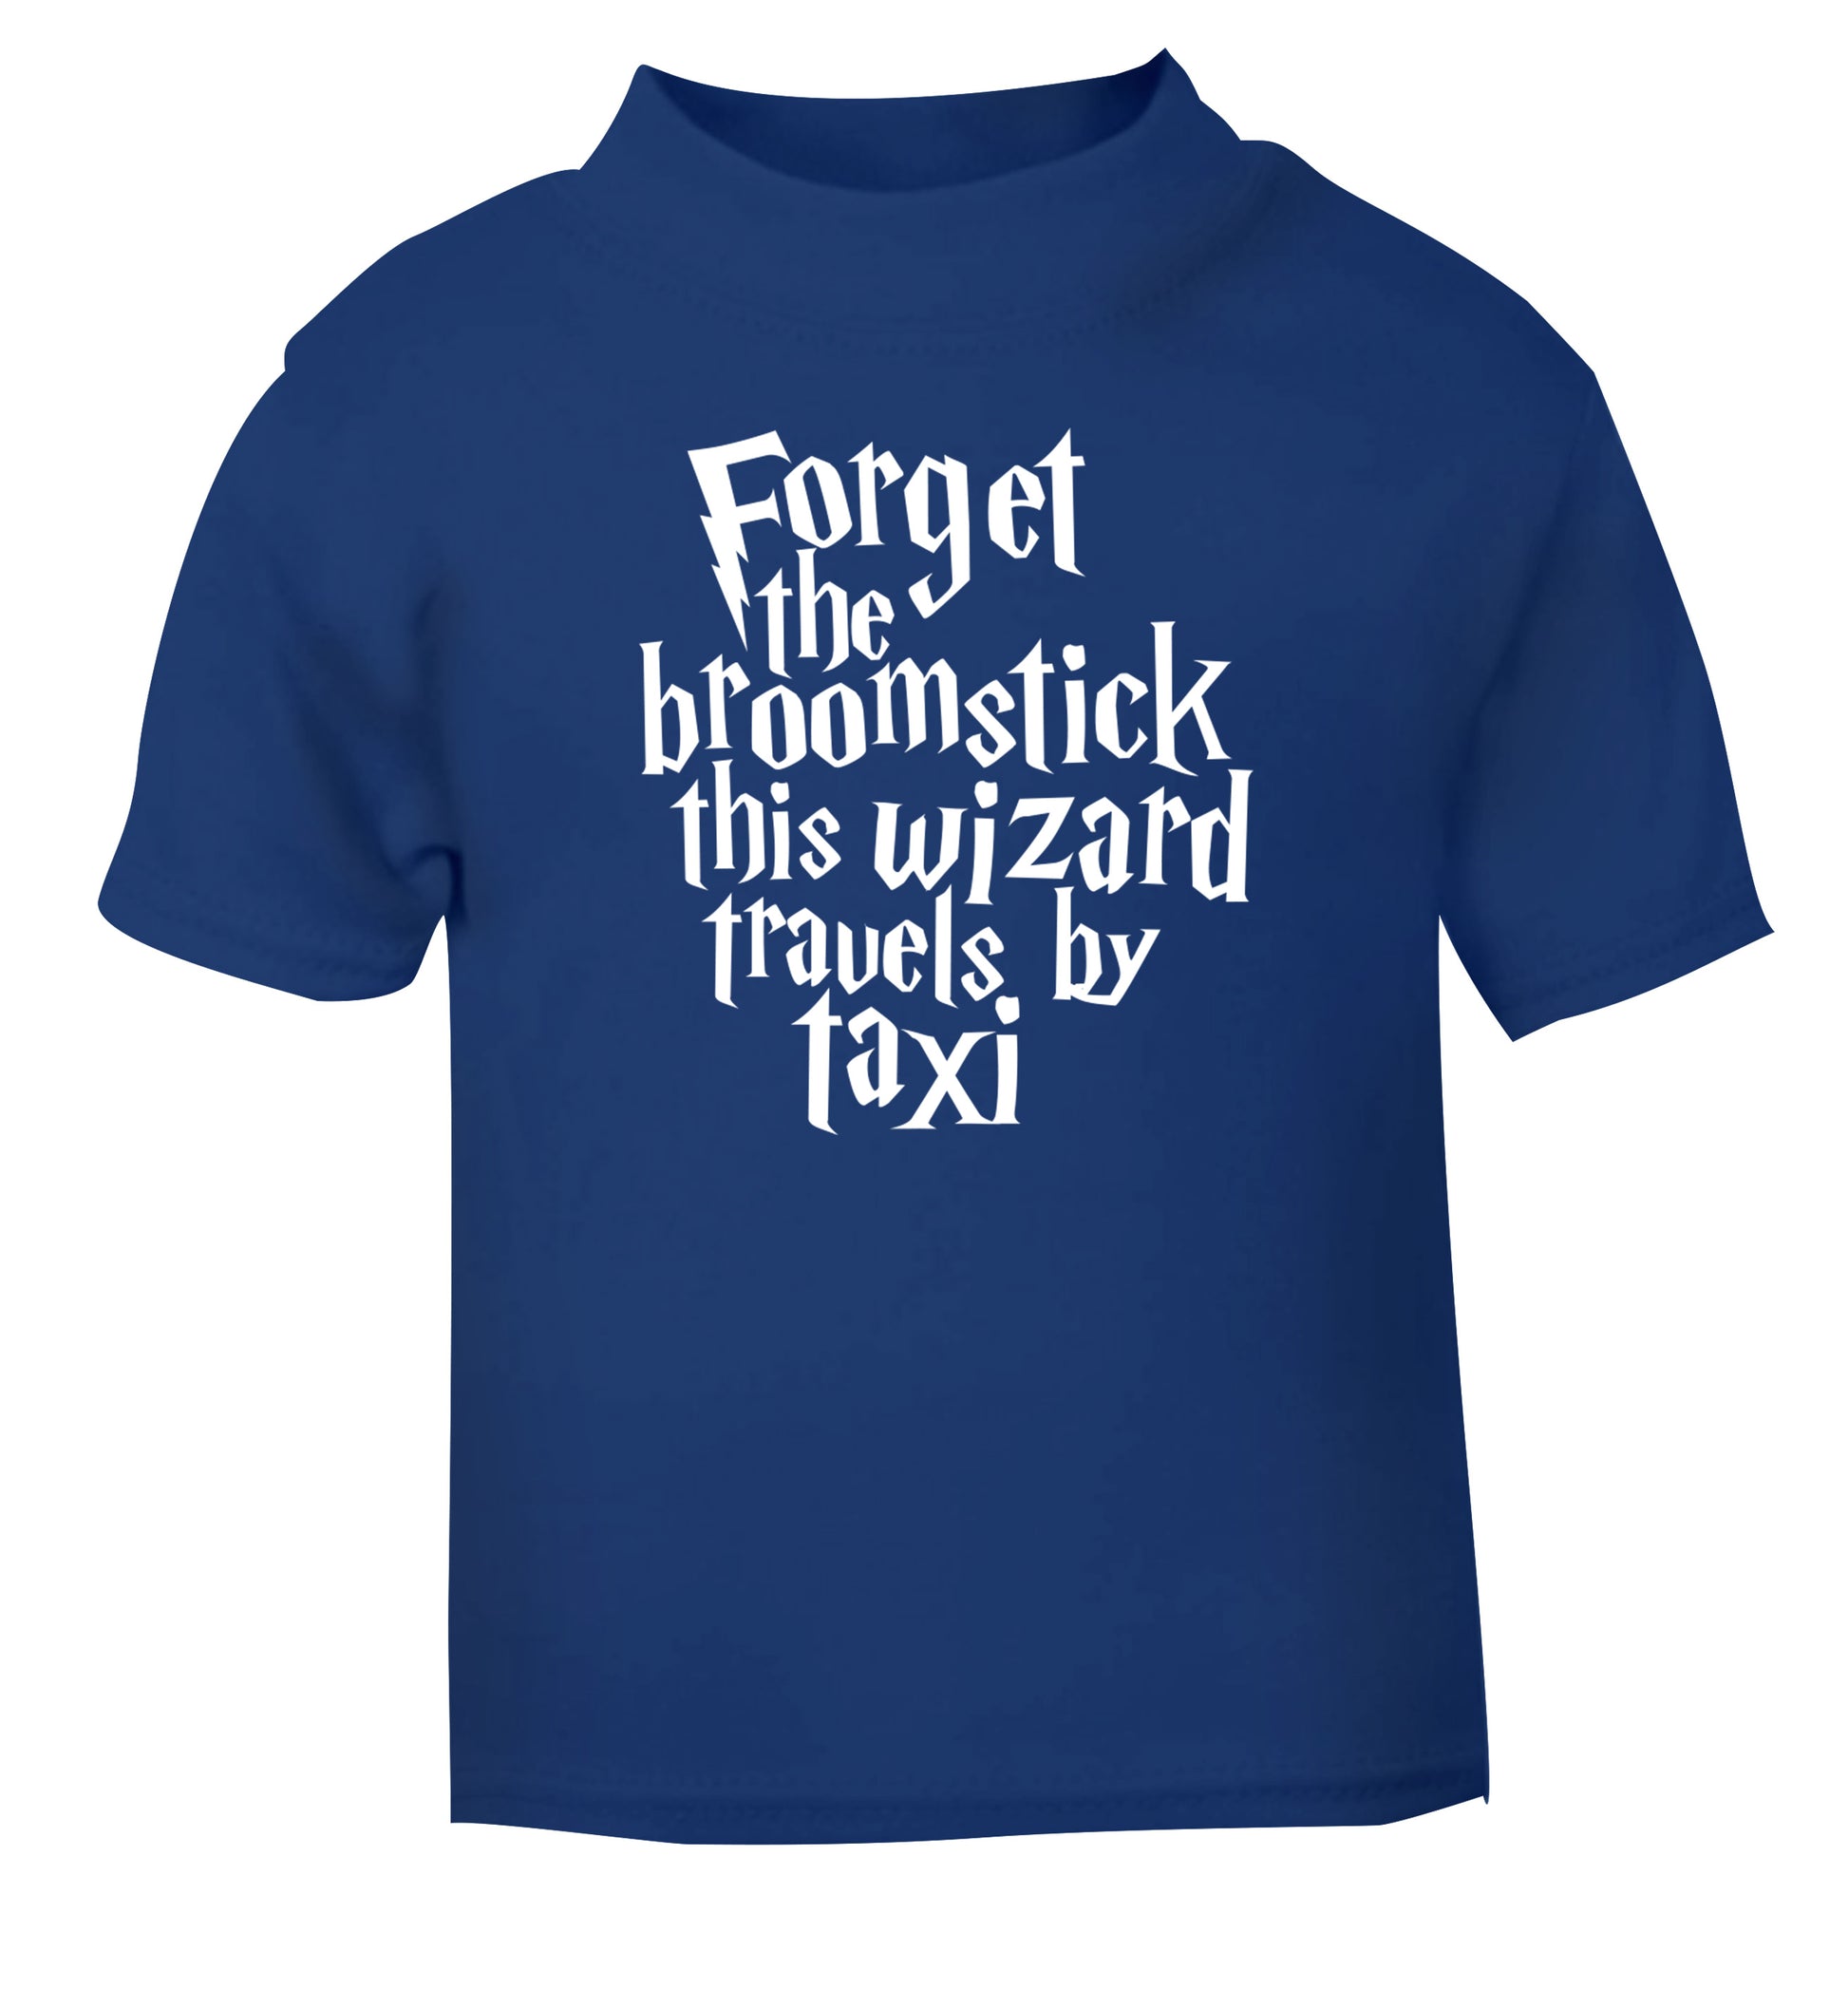 Forget the broomstick this wizard travels by taxi blue Baby Toddler Tshirt 2 Years